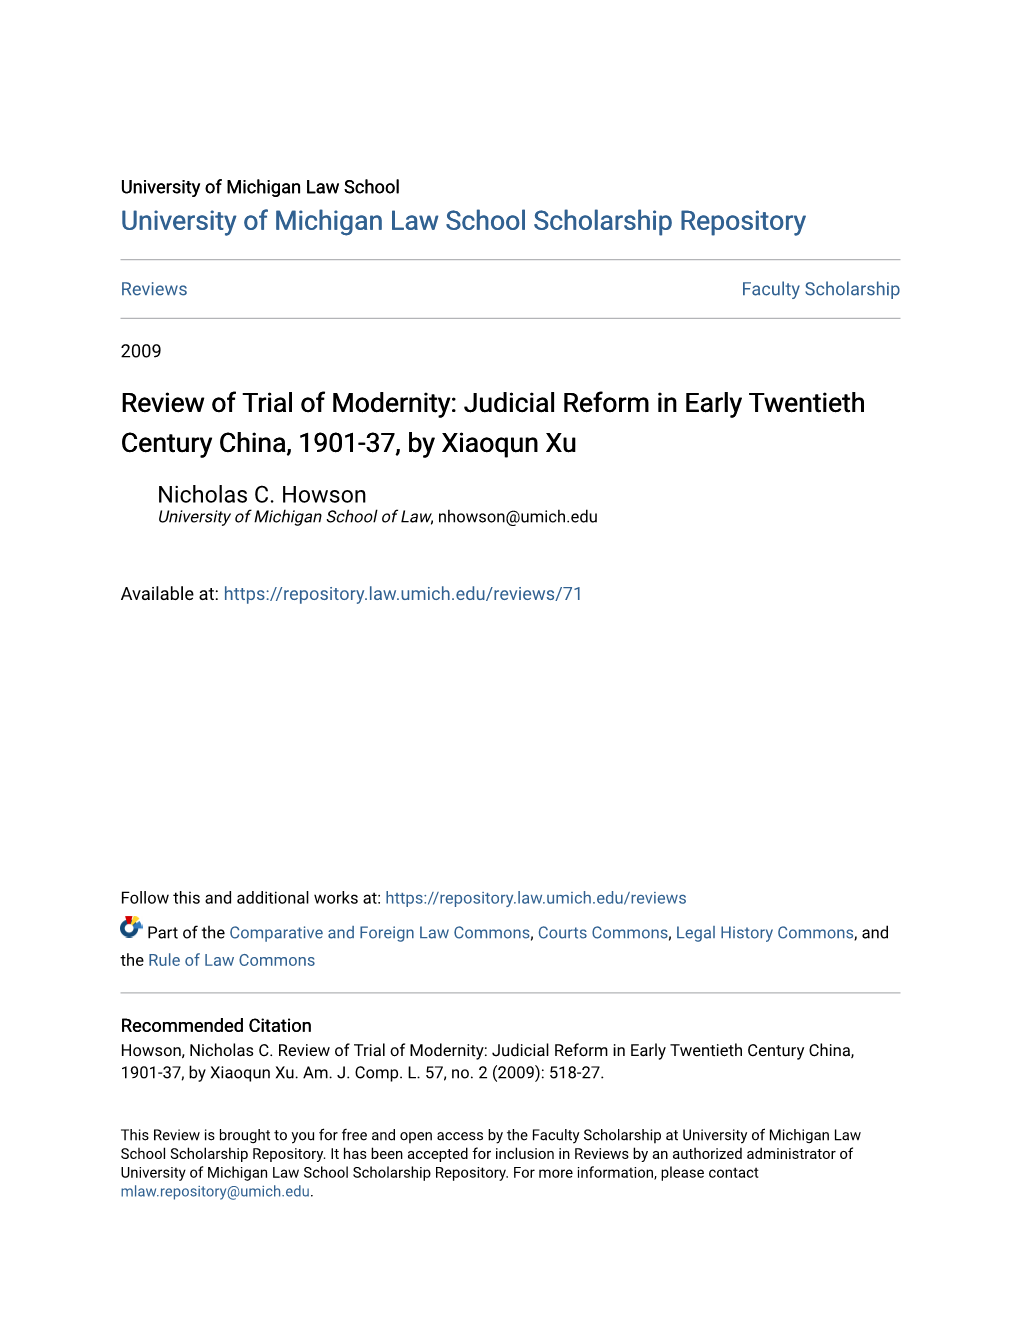 Review of Trial of Modernity: Judicial Reform in Early Twentieth Century China, 1901-37, by Xiaoqun Xu